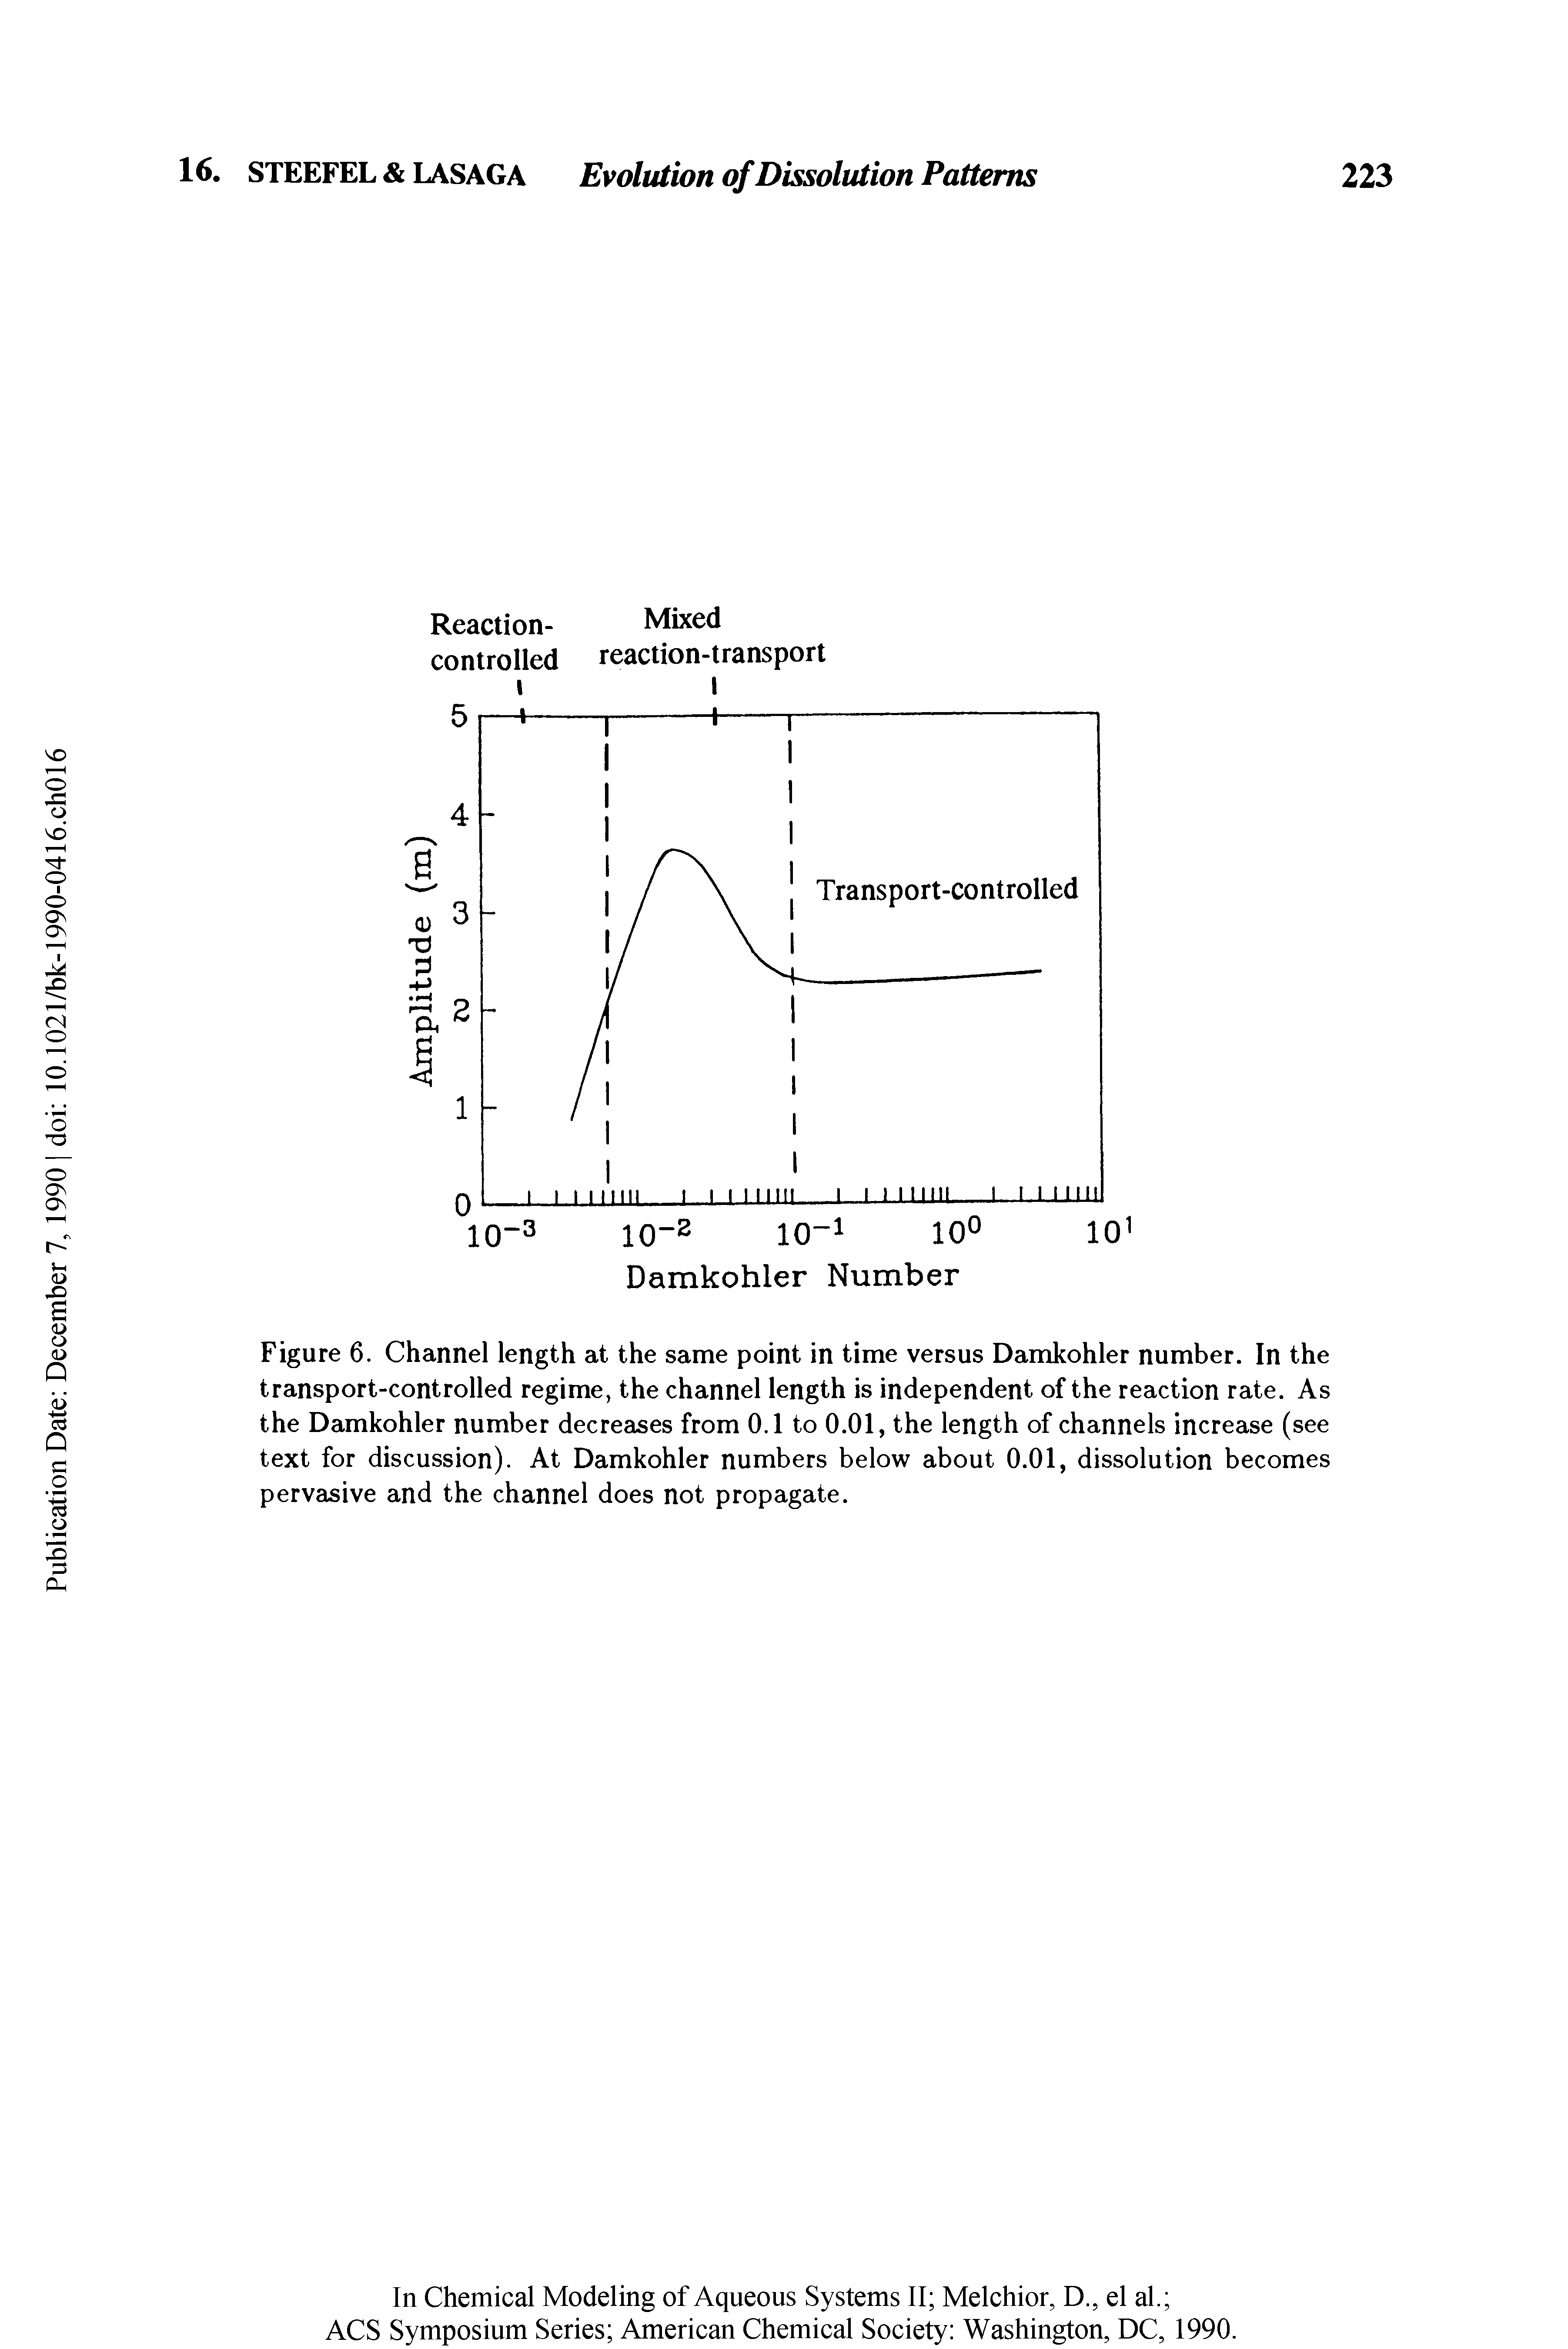 Figure 6. Channel length at the same point in time versus Damkohler number. In the transport-controlled regime, the channel length is independent of the reaction rate. As the Damkohler number decreases from 0.1 to 0.01, the length of channels increase (see text for discussion). At Damkohler numbers below about 0.01, dissolution becomes pervasive and the channel does not propagate.